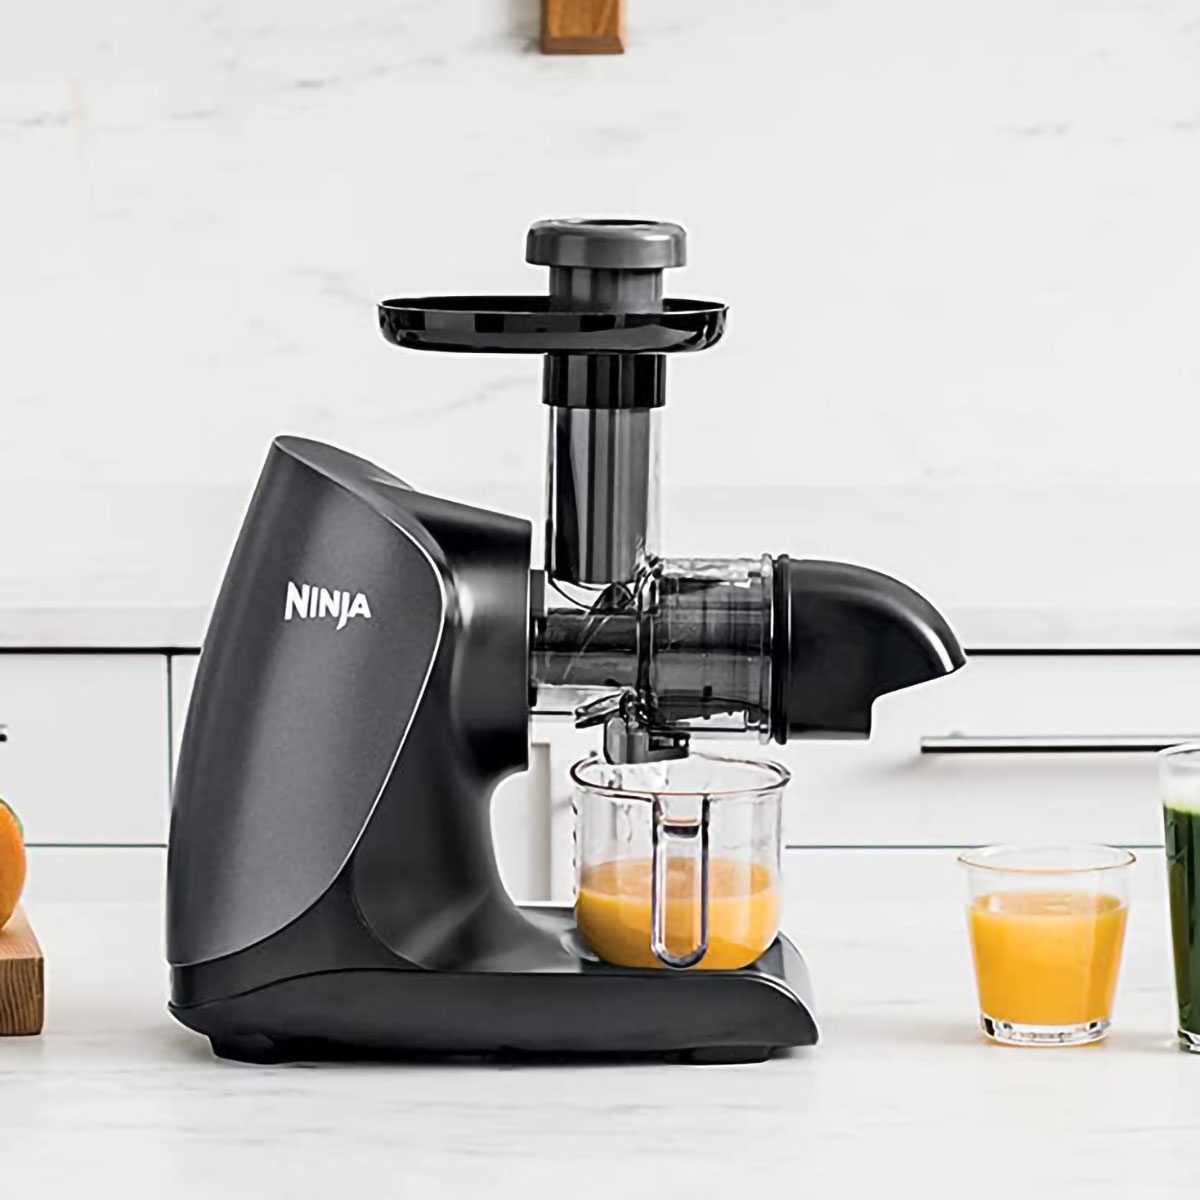 Ninja Cold Press Pro Compact Powerful Slow Juicer W/ Total Pulp Control